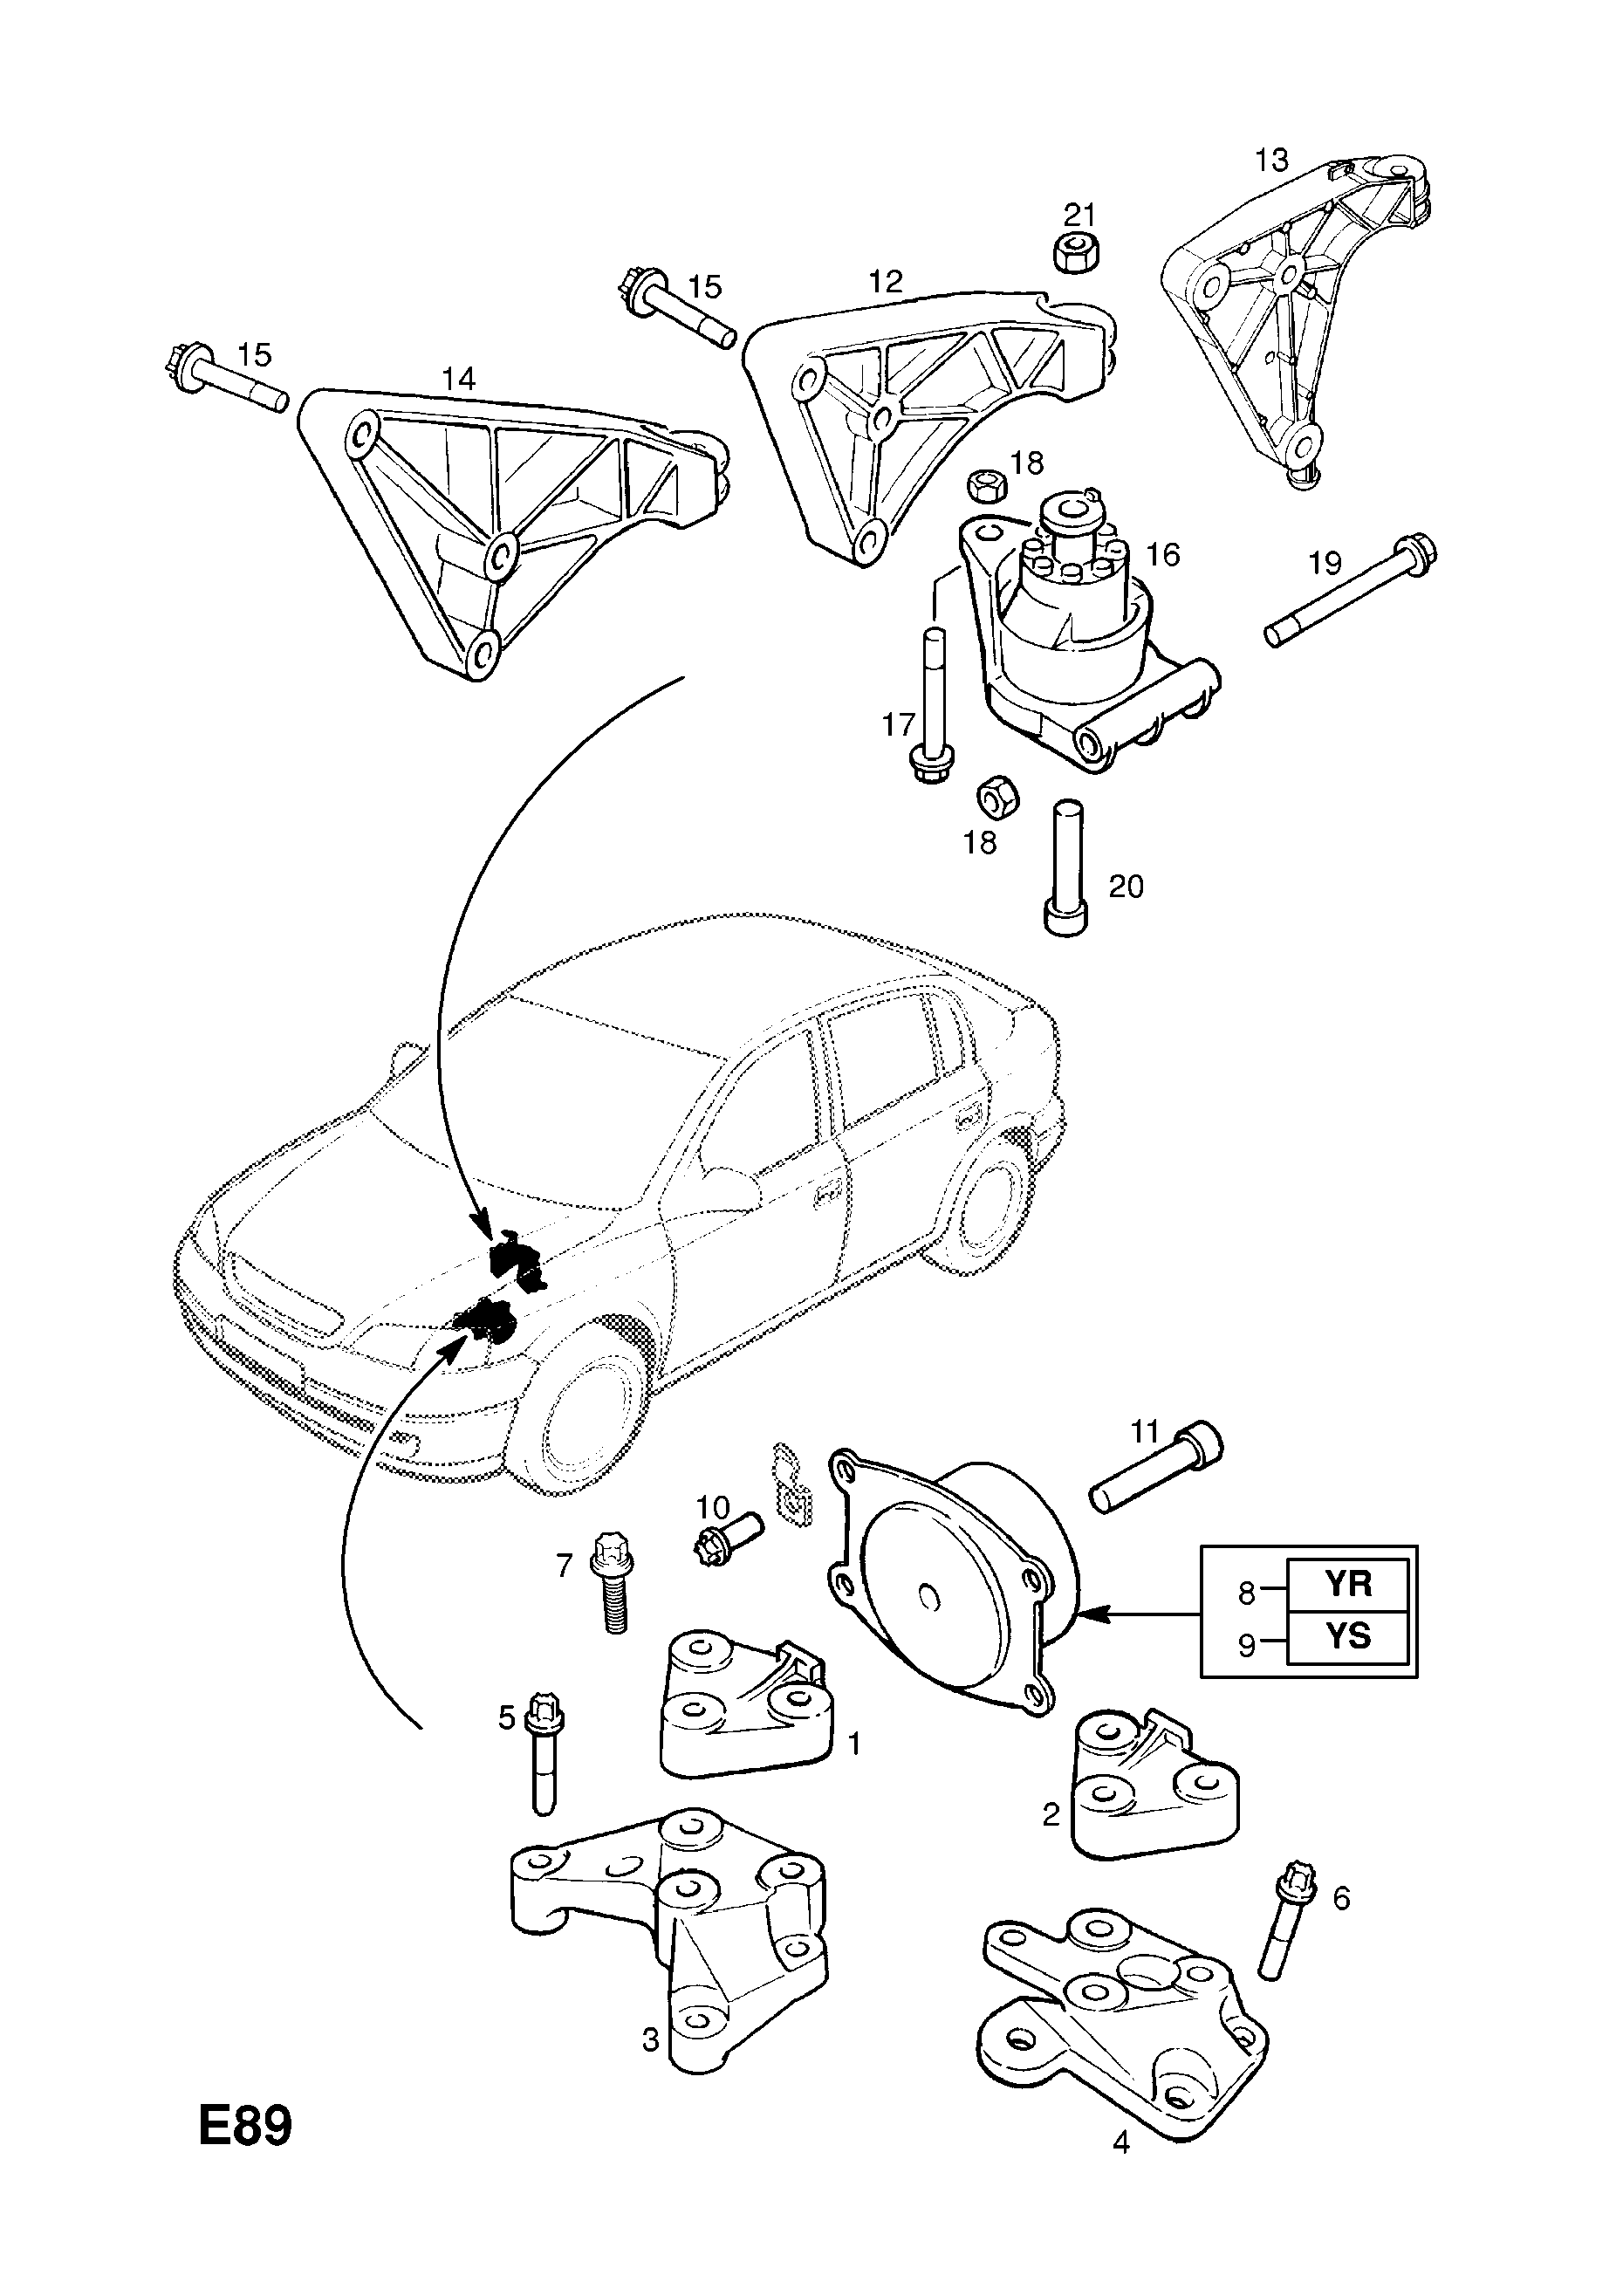 ENGINE MOUNTINGS (CONTD.) <small><i>[REAR ENGINE MOUNTING]</i></small>